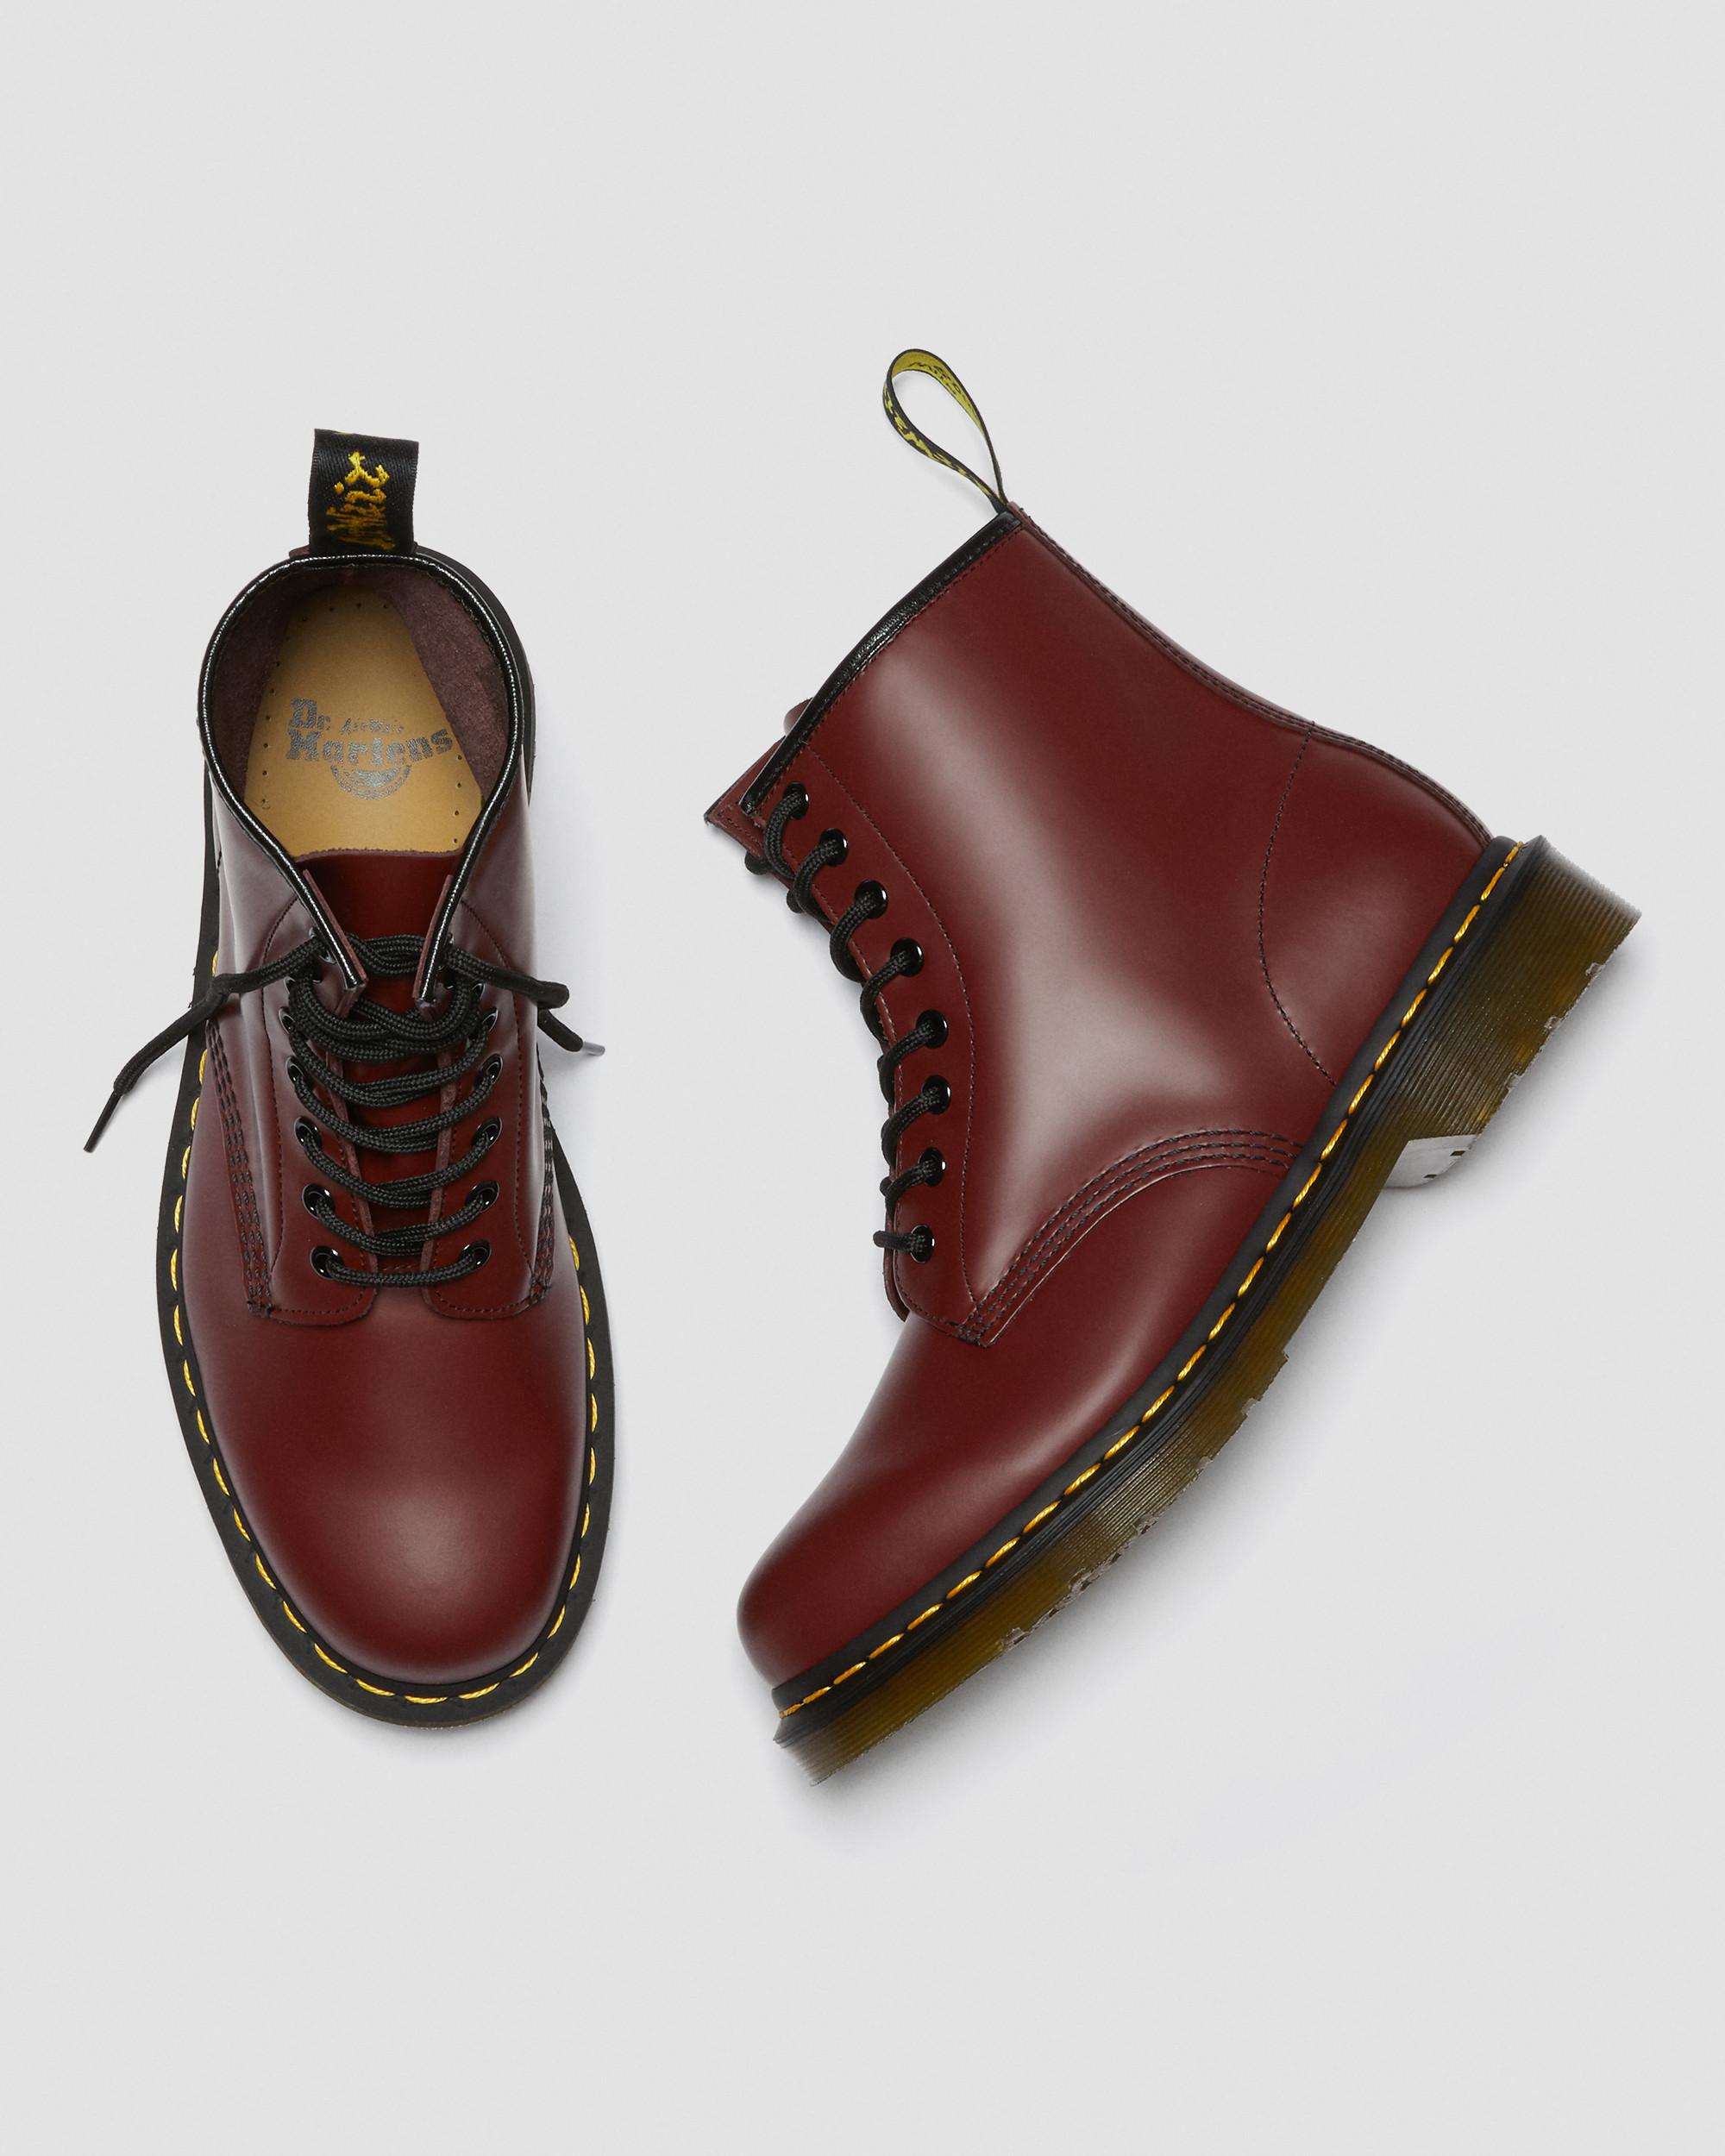 1460 Smooth Leather Lace Up Boots in Cherry Red | Dr. Martens